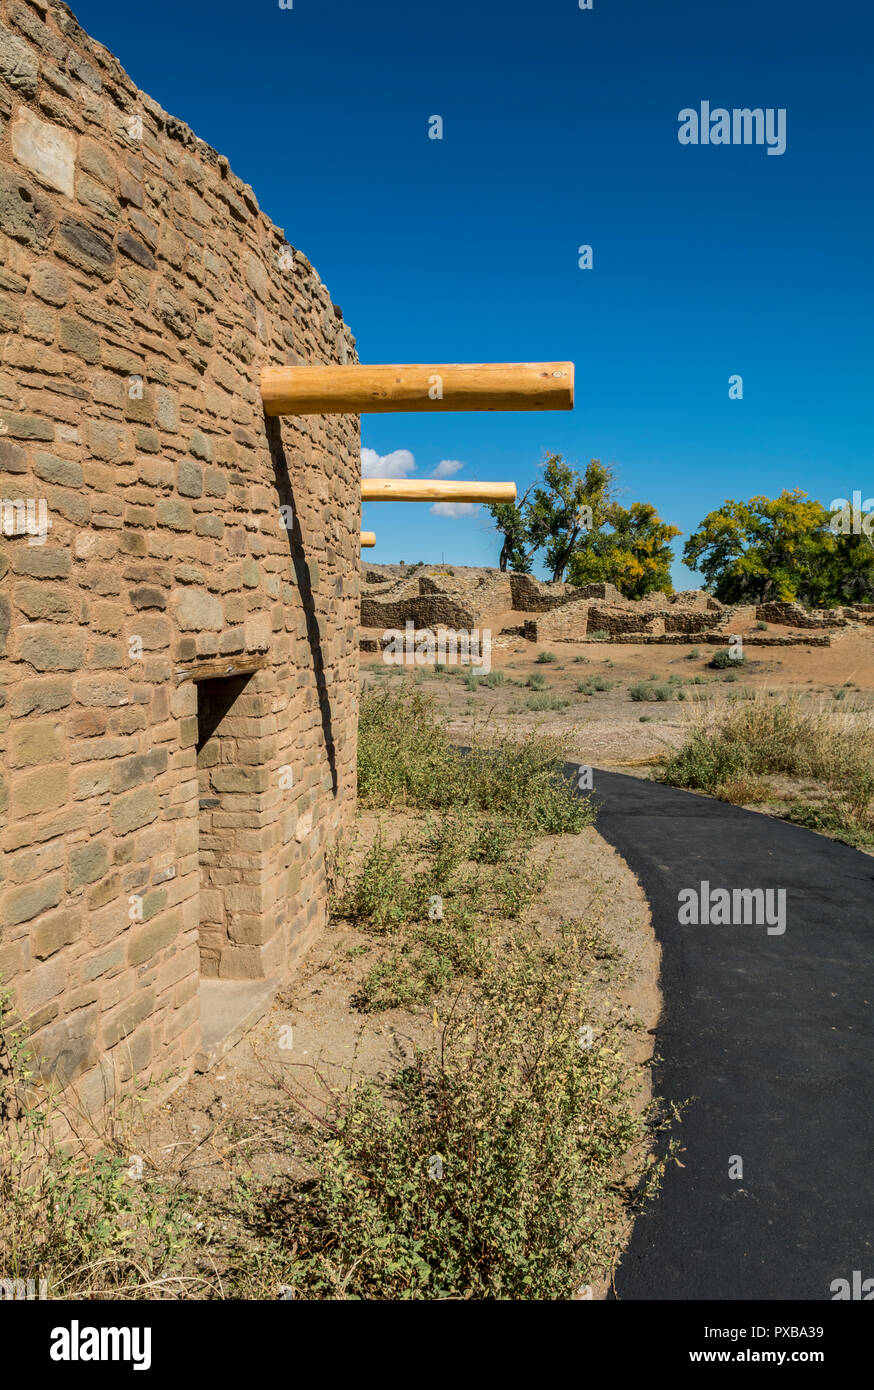 Aztec Ruins National Monument, Ancestral Pueblo ruins in the Four Corners region New Mexico, USA. Stock Photo